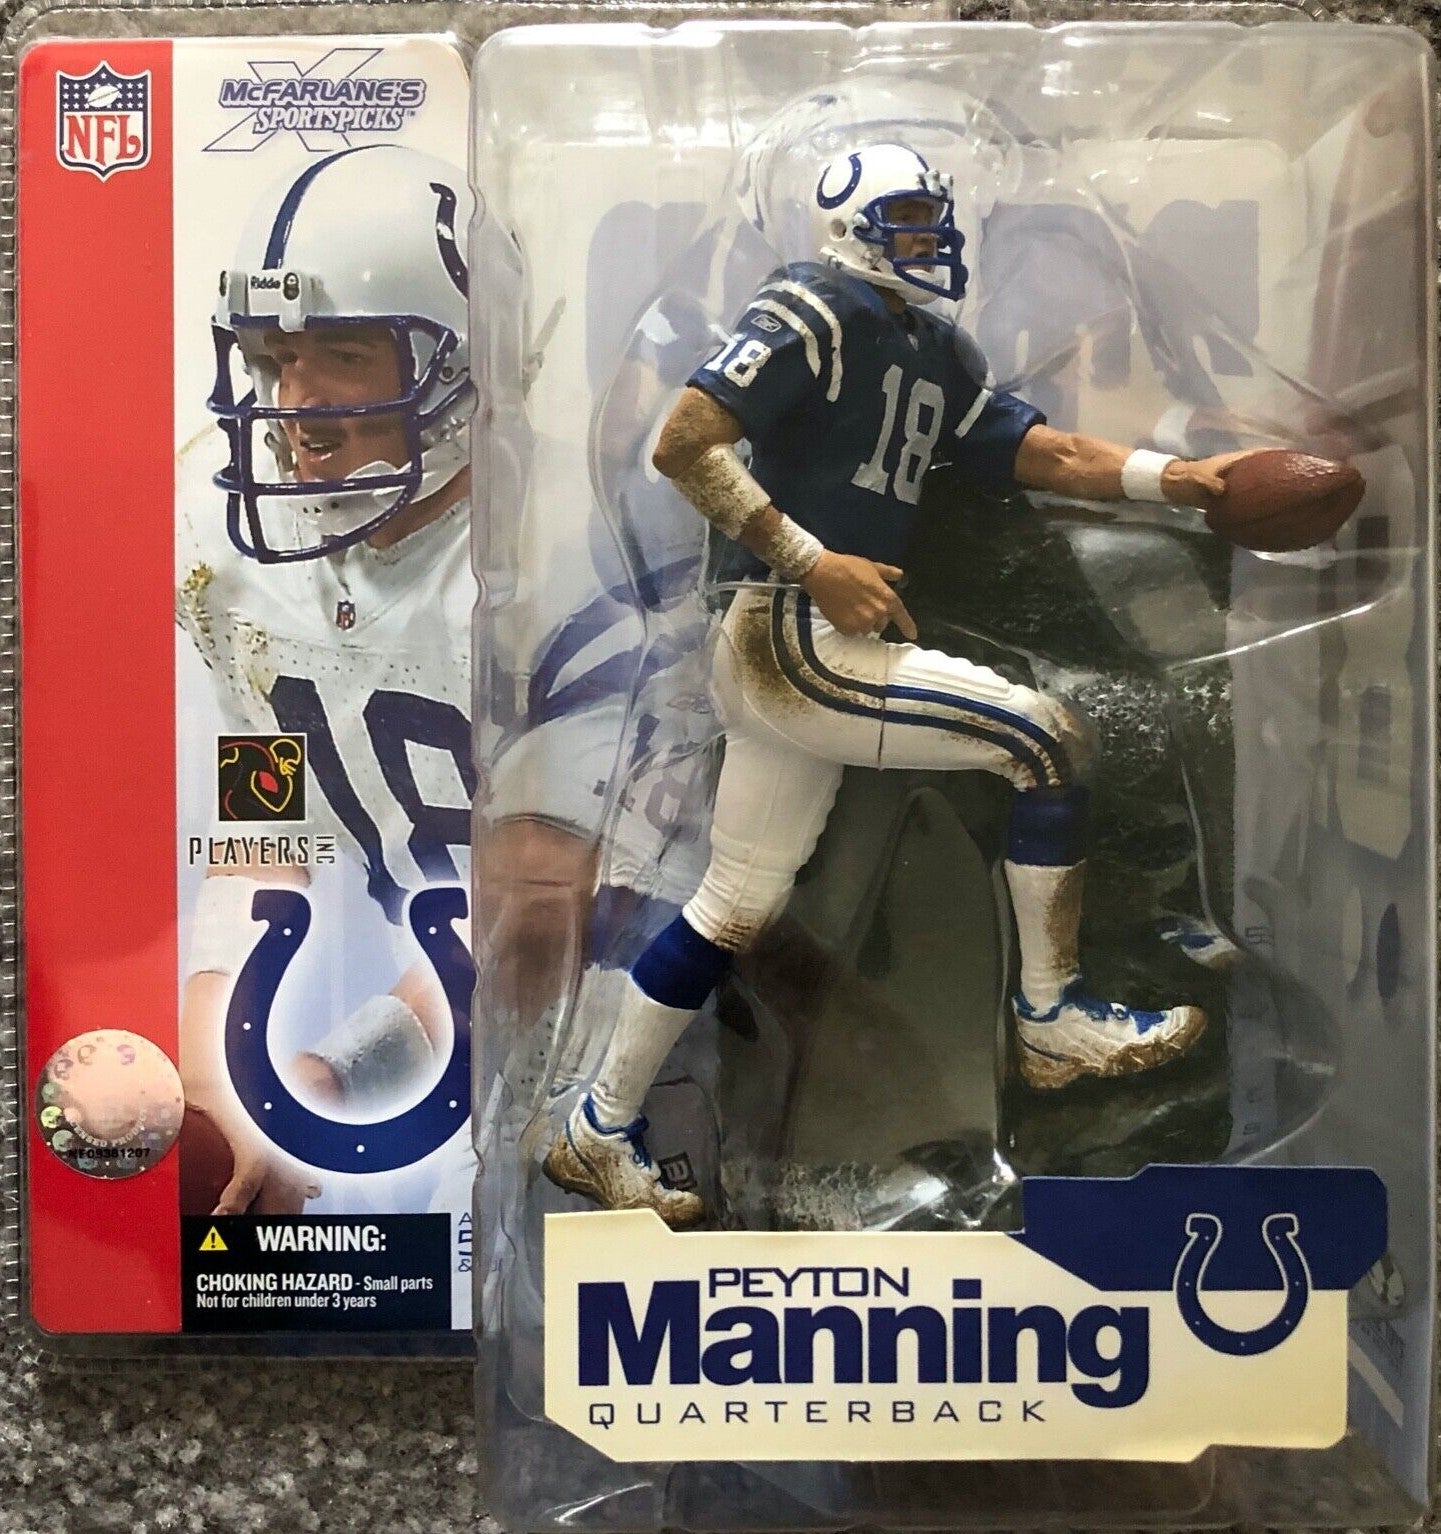 NFL Football series 4 PEYTON MANNING variant/chase action figure